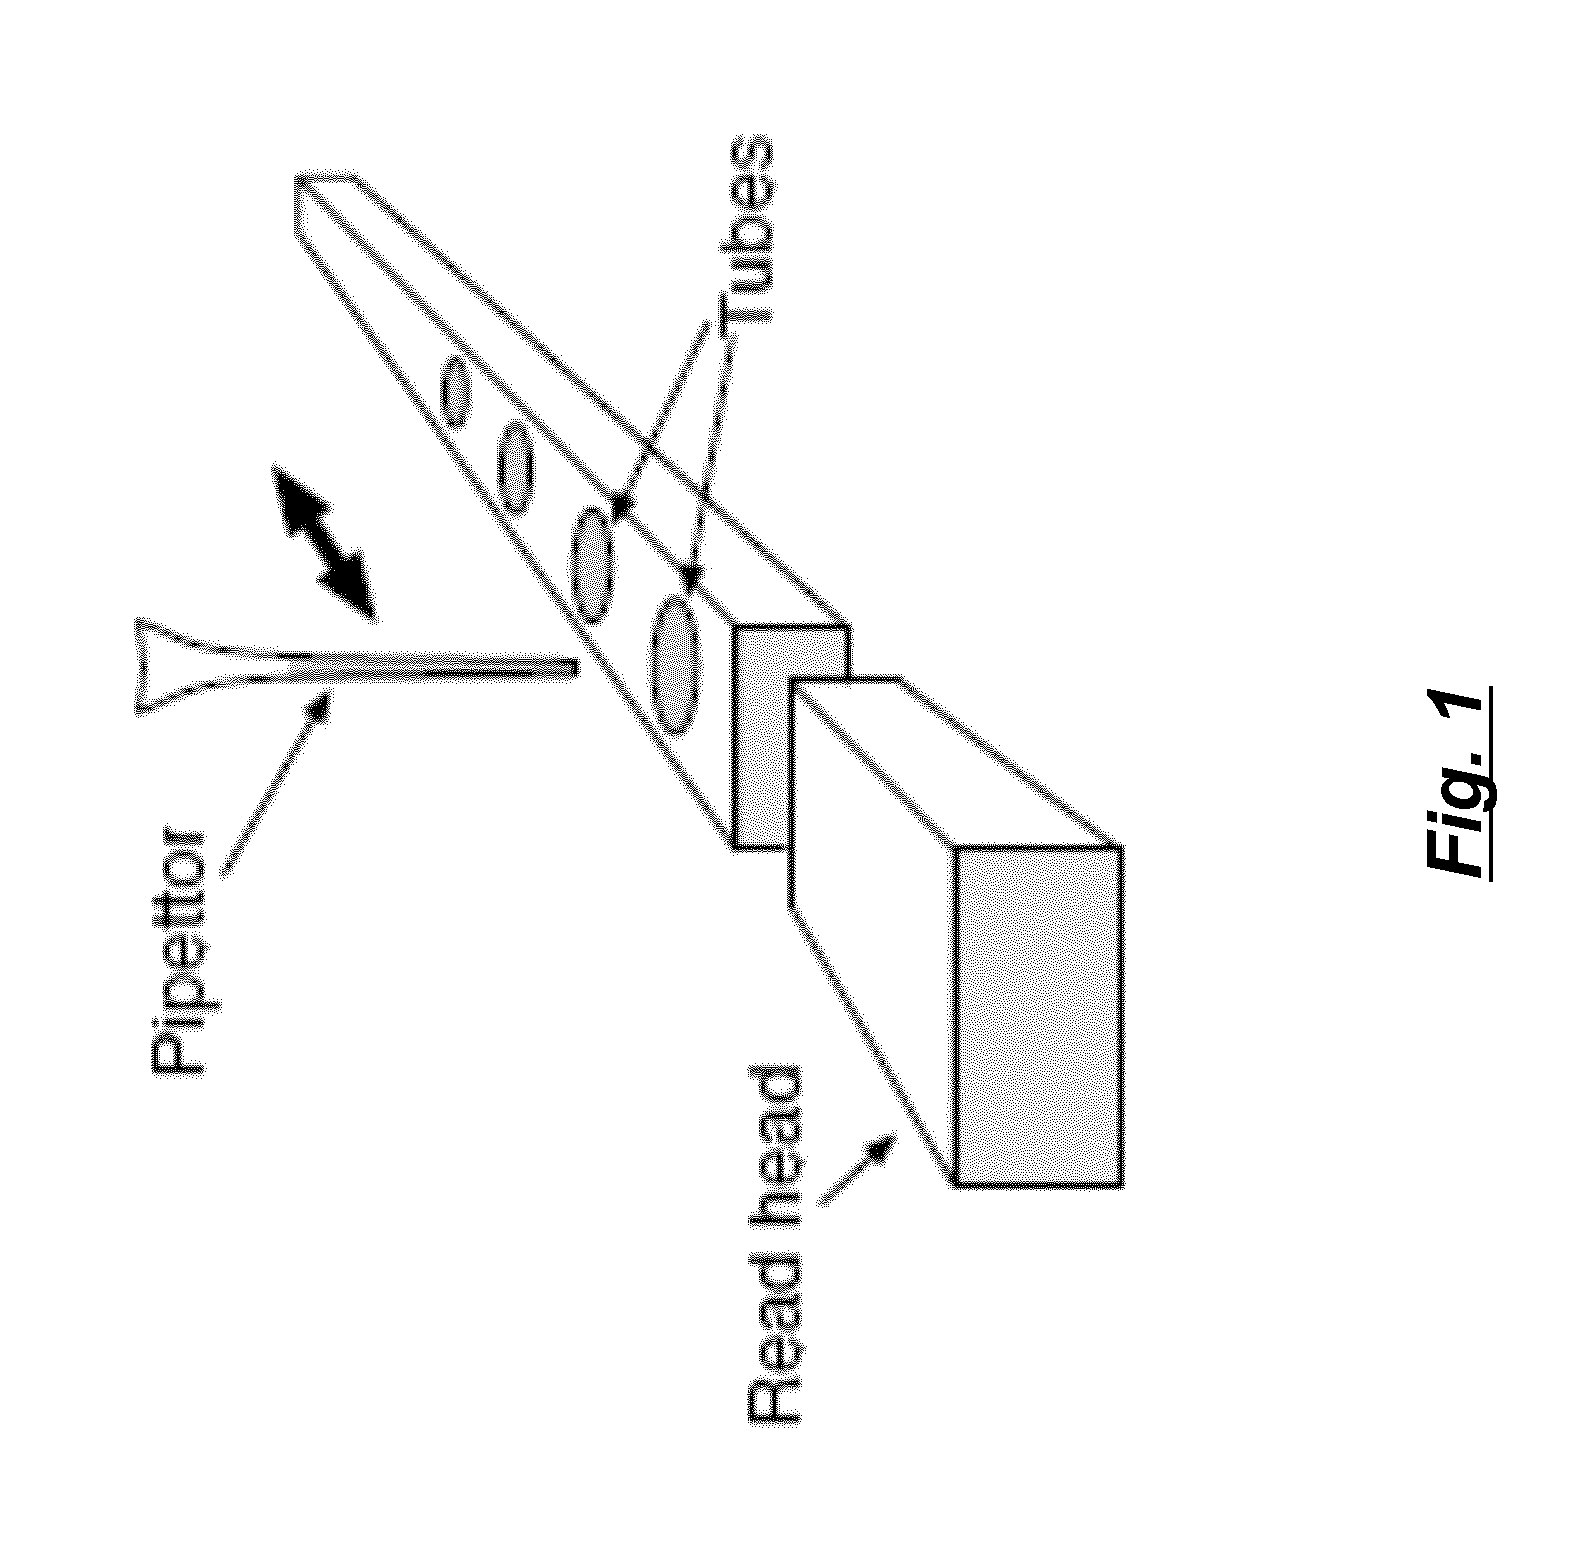 Method and system for detecting 2D barcode in a circular label